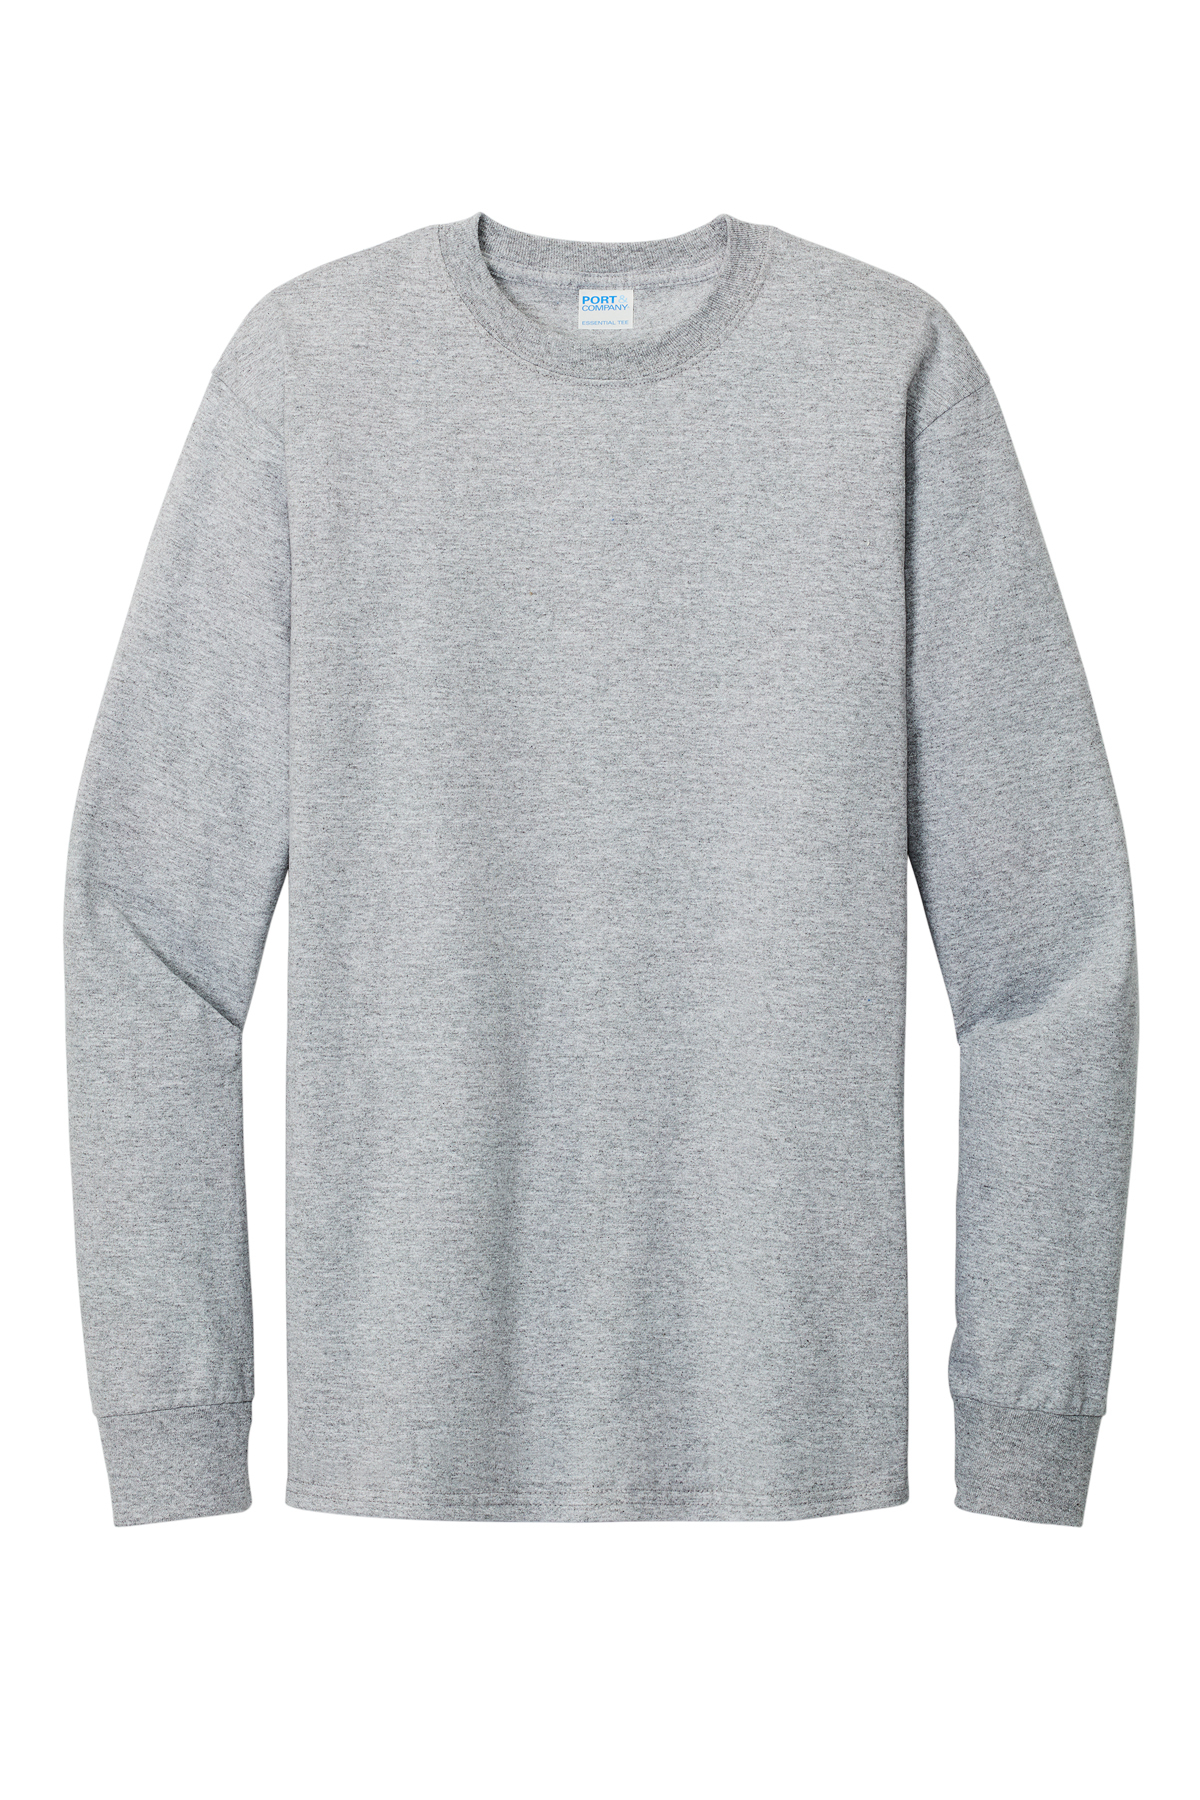 Port & Company Tall Long Sleeve Essential Tee | Product | Company Casuals